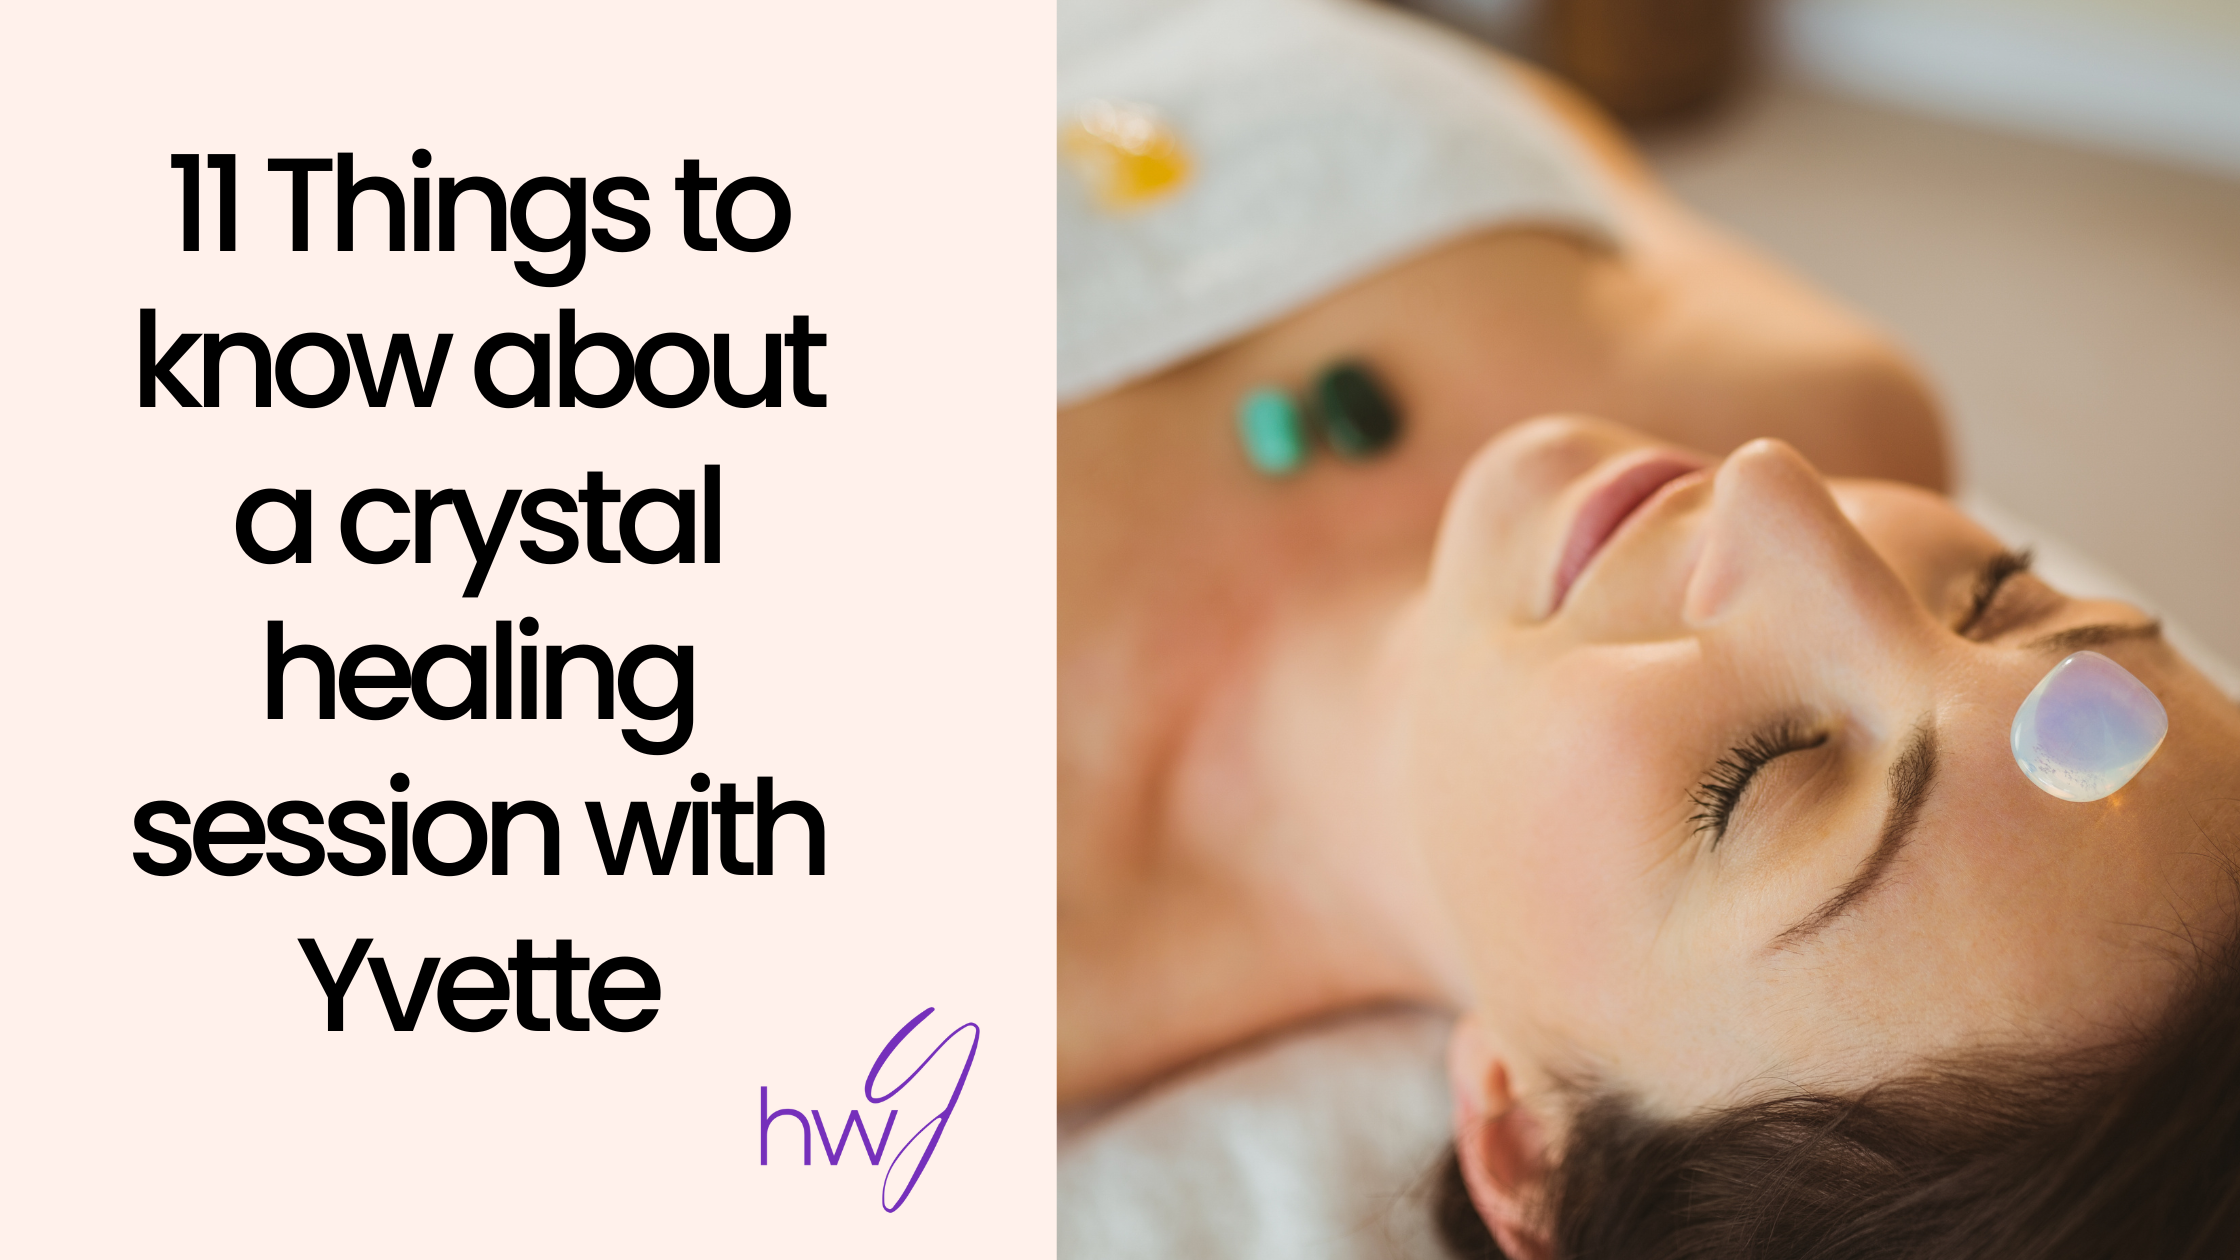 A Crystal Healing Session with Yvette; 11 things to know.